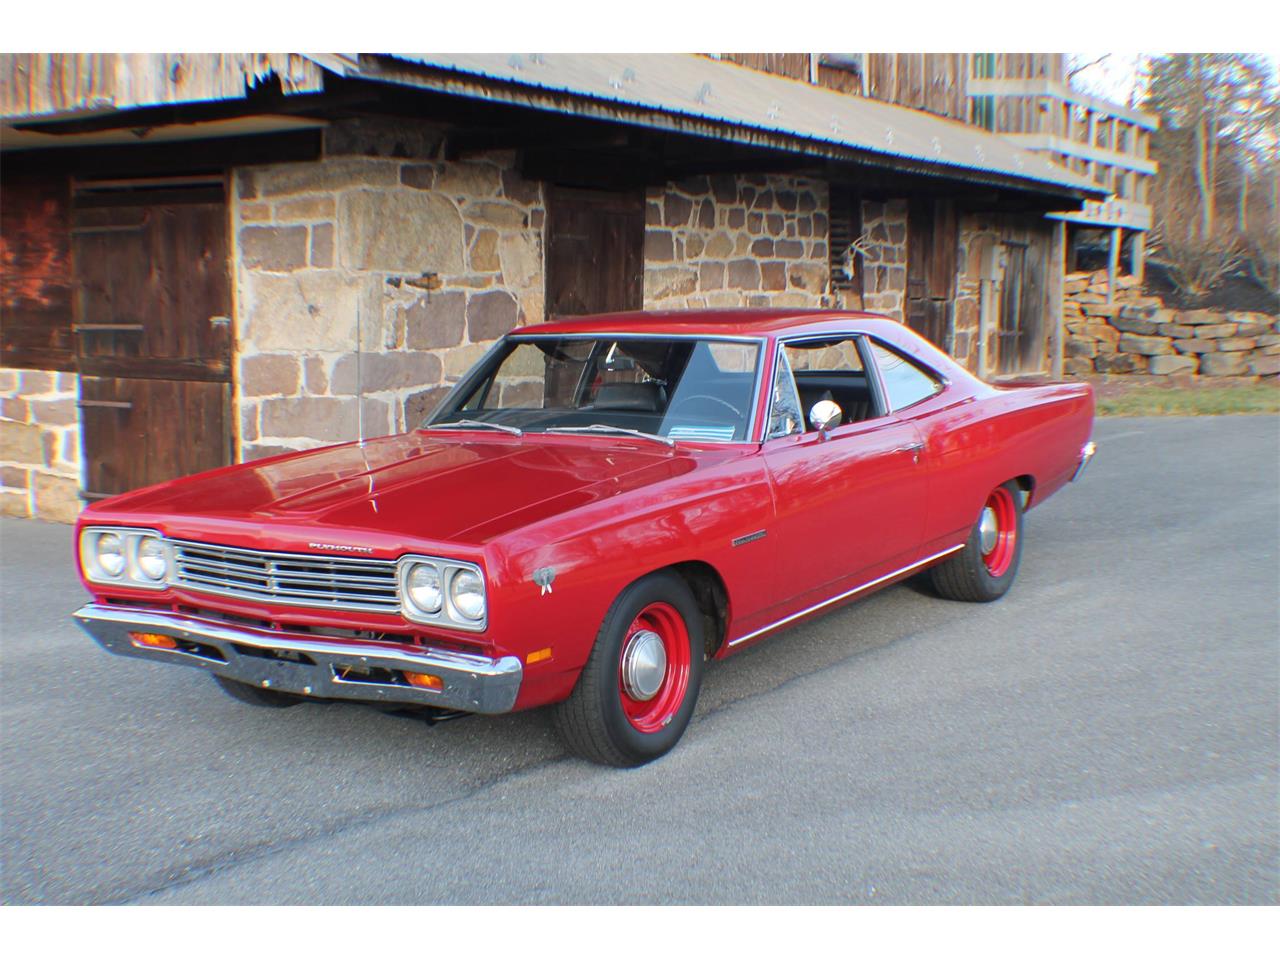 For Sale at Auction: 1969 Plymouth Belvedere in Lakeland, Florida